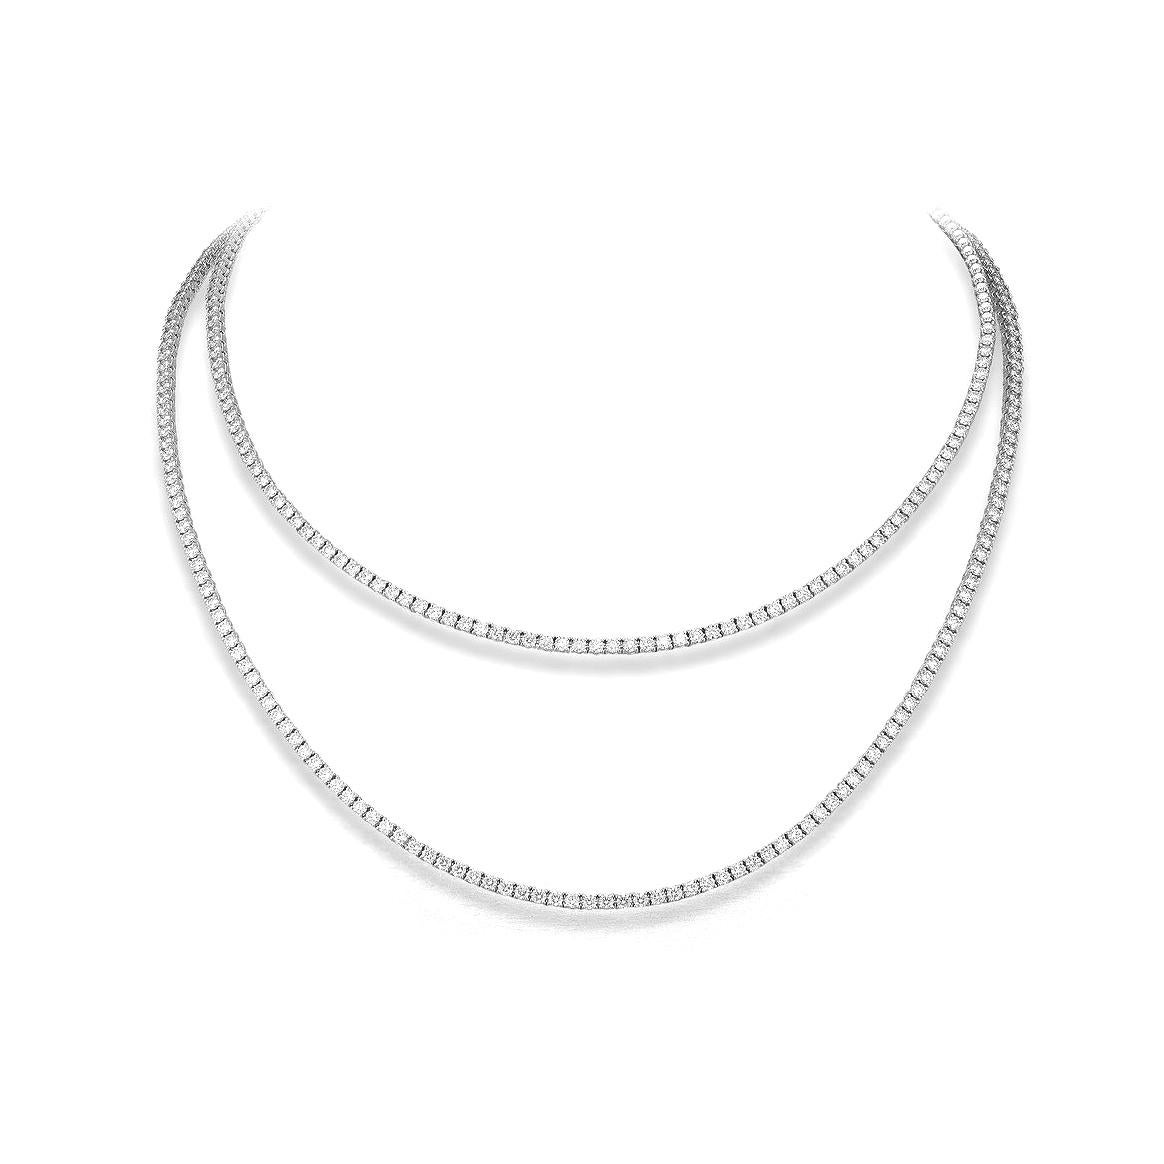 Necklace in 18kt white gold set with 350 diamonds 22.37 cts G VS1 (100 cm)